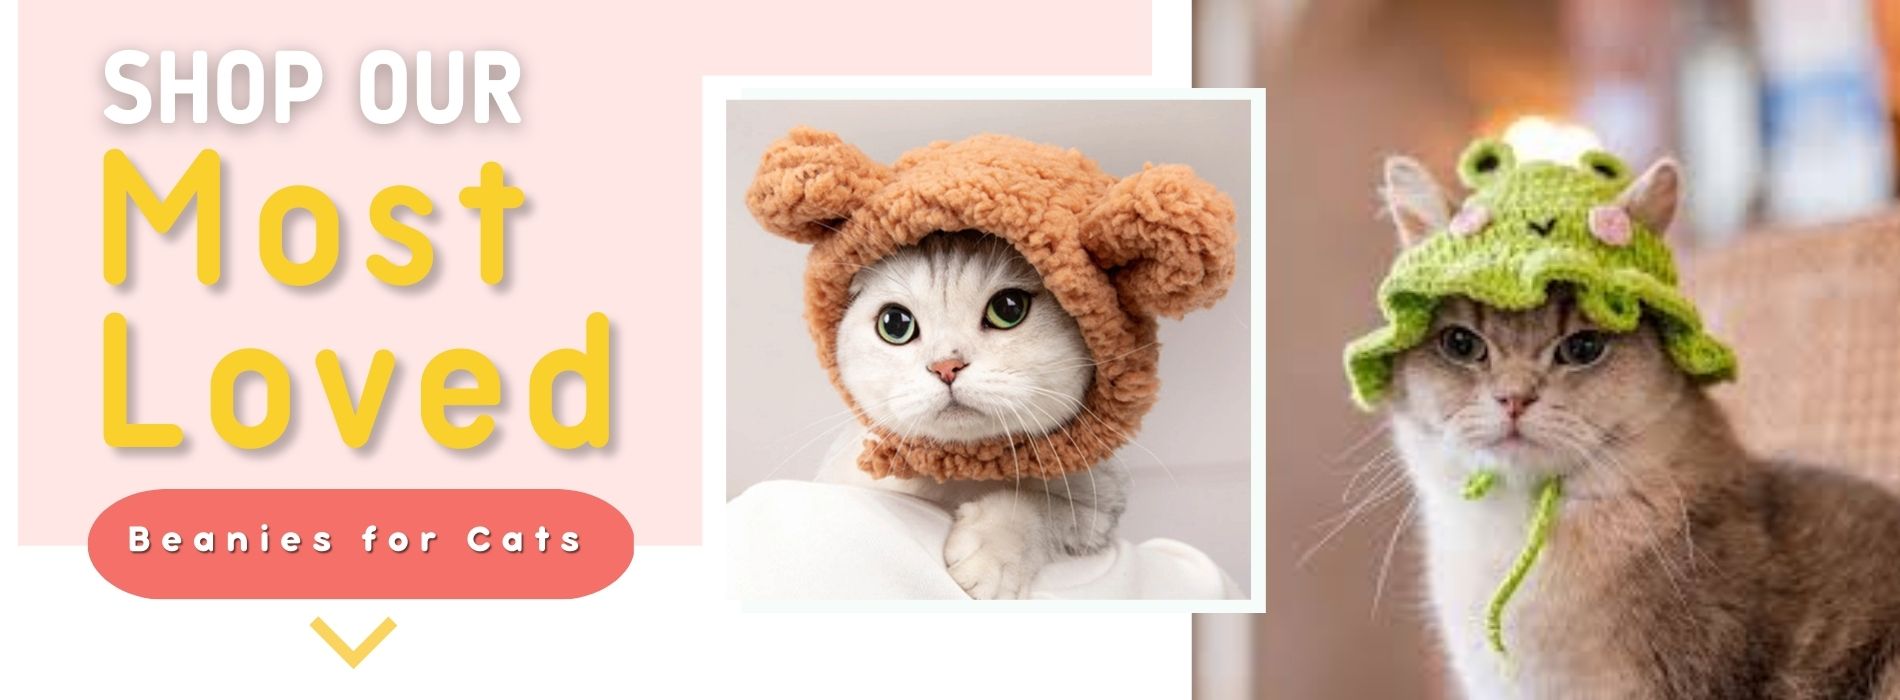 beanies-for-cats